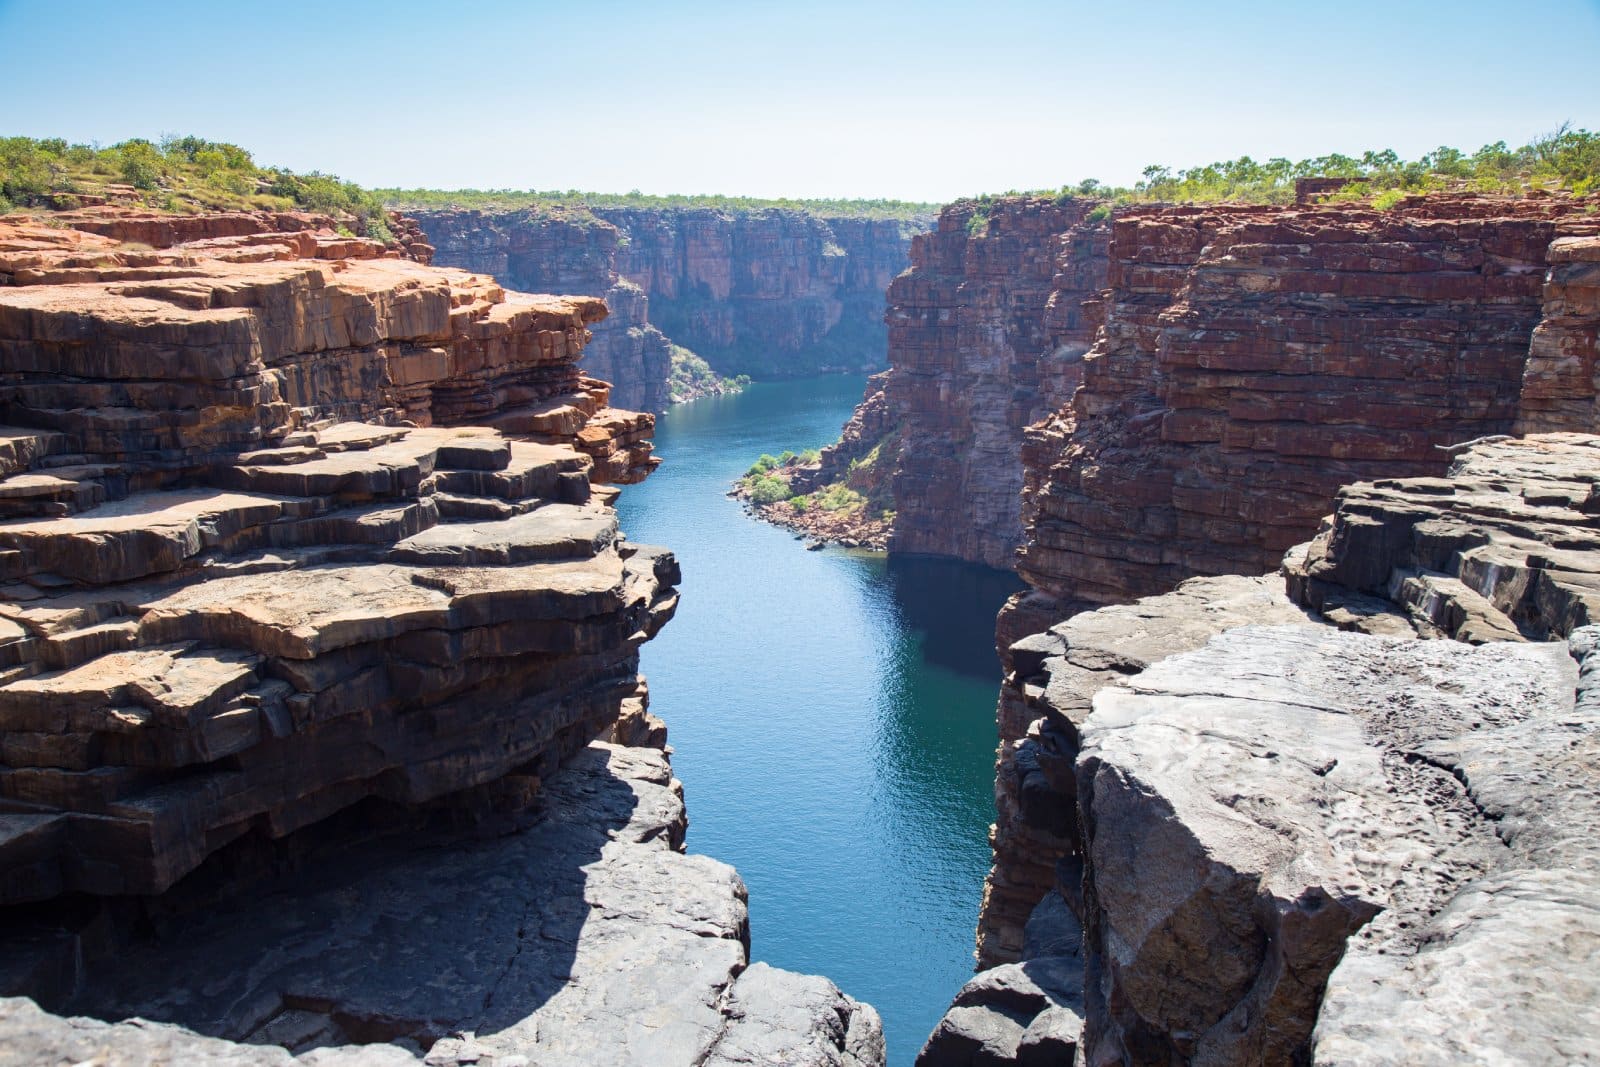 <p><span>The Kimberley region in Western Australia is a vast wilderness area known for its rugged landscapes, ancient gorges, and Aboriginal rock art. Highlights include the Bungle Bungle Range in Purnululu National Park, the stunning waterfalls of Mitchell Plateau, and the horizontal waterfalls at Talbot Bay.</span></p> <p><span>The Kimberley offers a true off-the-beaten-path adventure, with opportunities for 4WD tours, river cruises, and scenic flights. The region’s rich Aboriginal heritage adds a cultural dimension to its natural beauty. </span></p> <p><b>Insider’s Tip: </b><span>Take a scenic flight over the Bungle Bungle Range for a spectacular aerial view. </span></p> <p><b>When to Travel: </b><span>May to October for the dry season and accessible roads. </span></p> <p><b>How to Get There: </b><span>Fly to Broome or Kununurra and join a tour or rent a 4WD vehicle.</span></p>